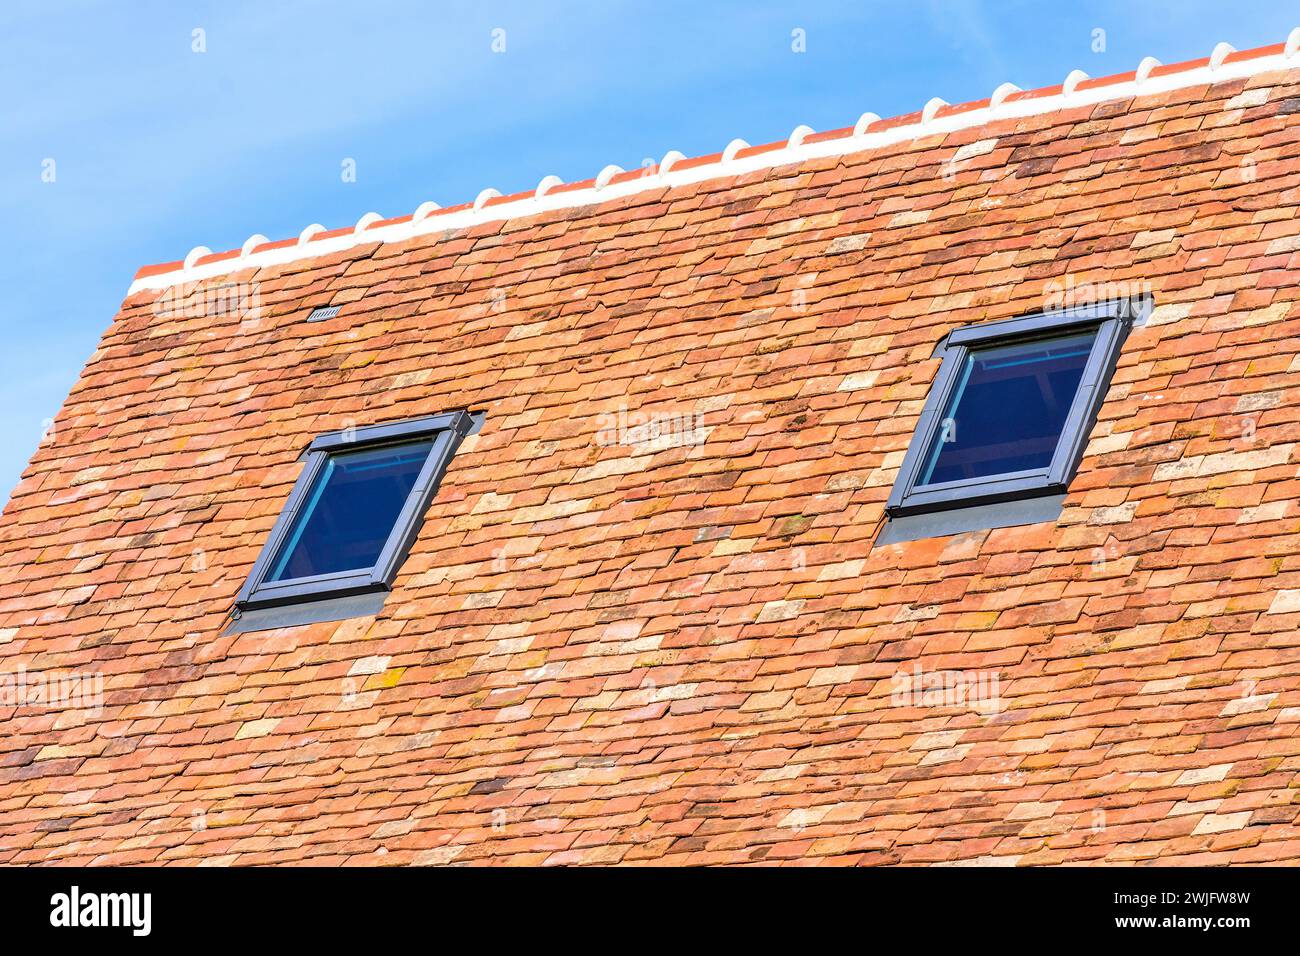 New roof construction with terracotta tiles covering and Velux windows - Preuilly-sur-Claise, Indre-et-Loire (37), France. Stock Photo